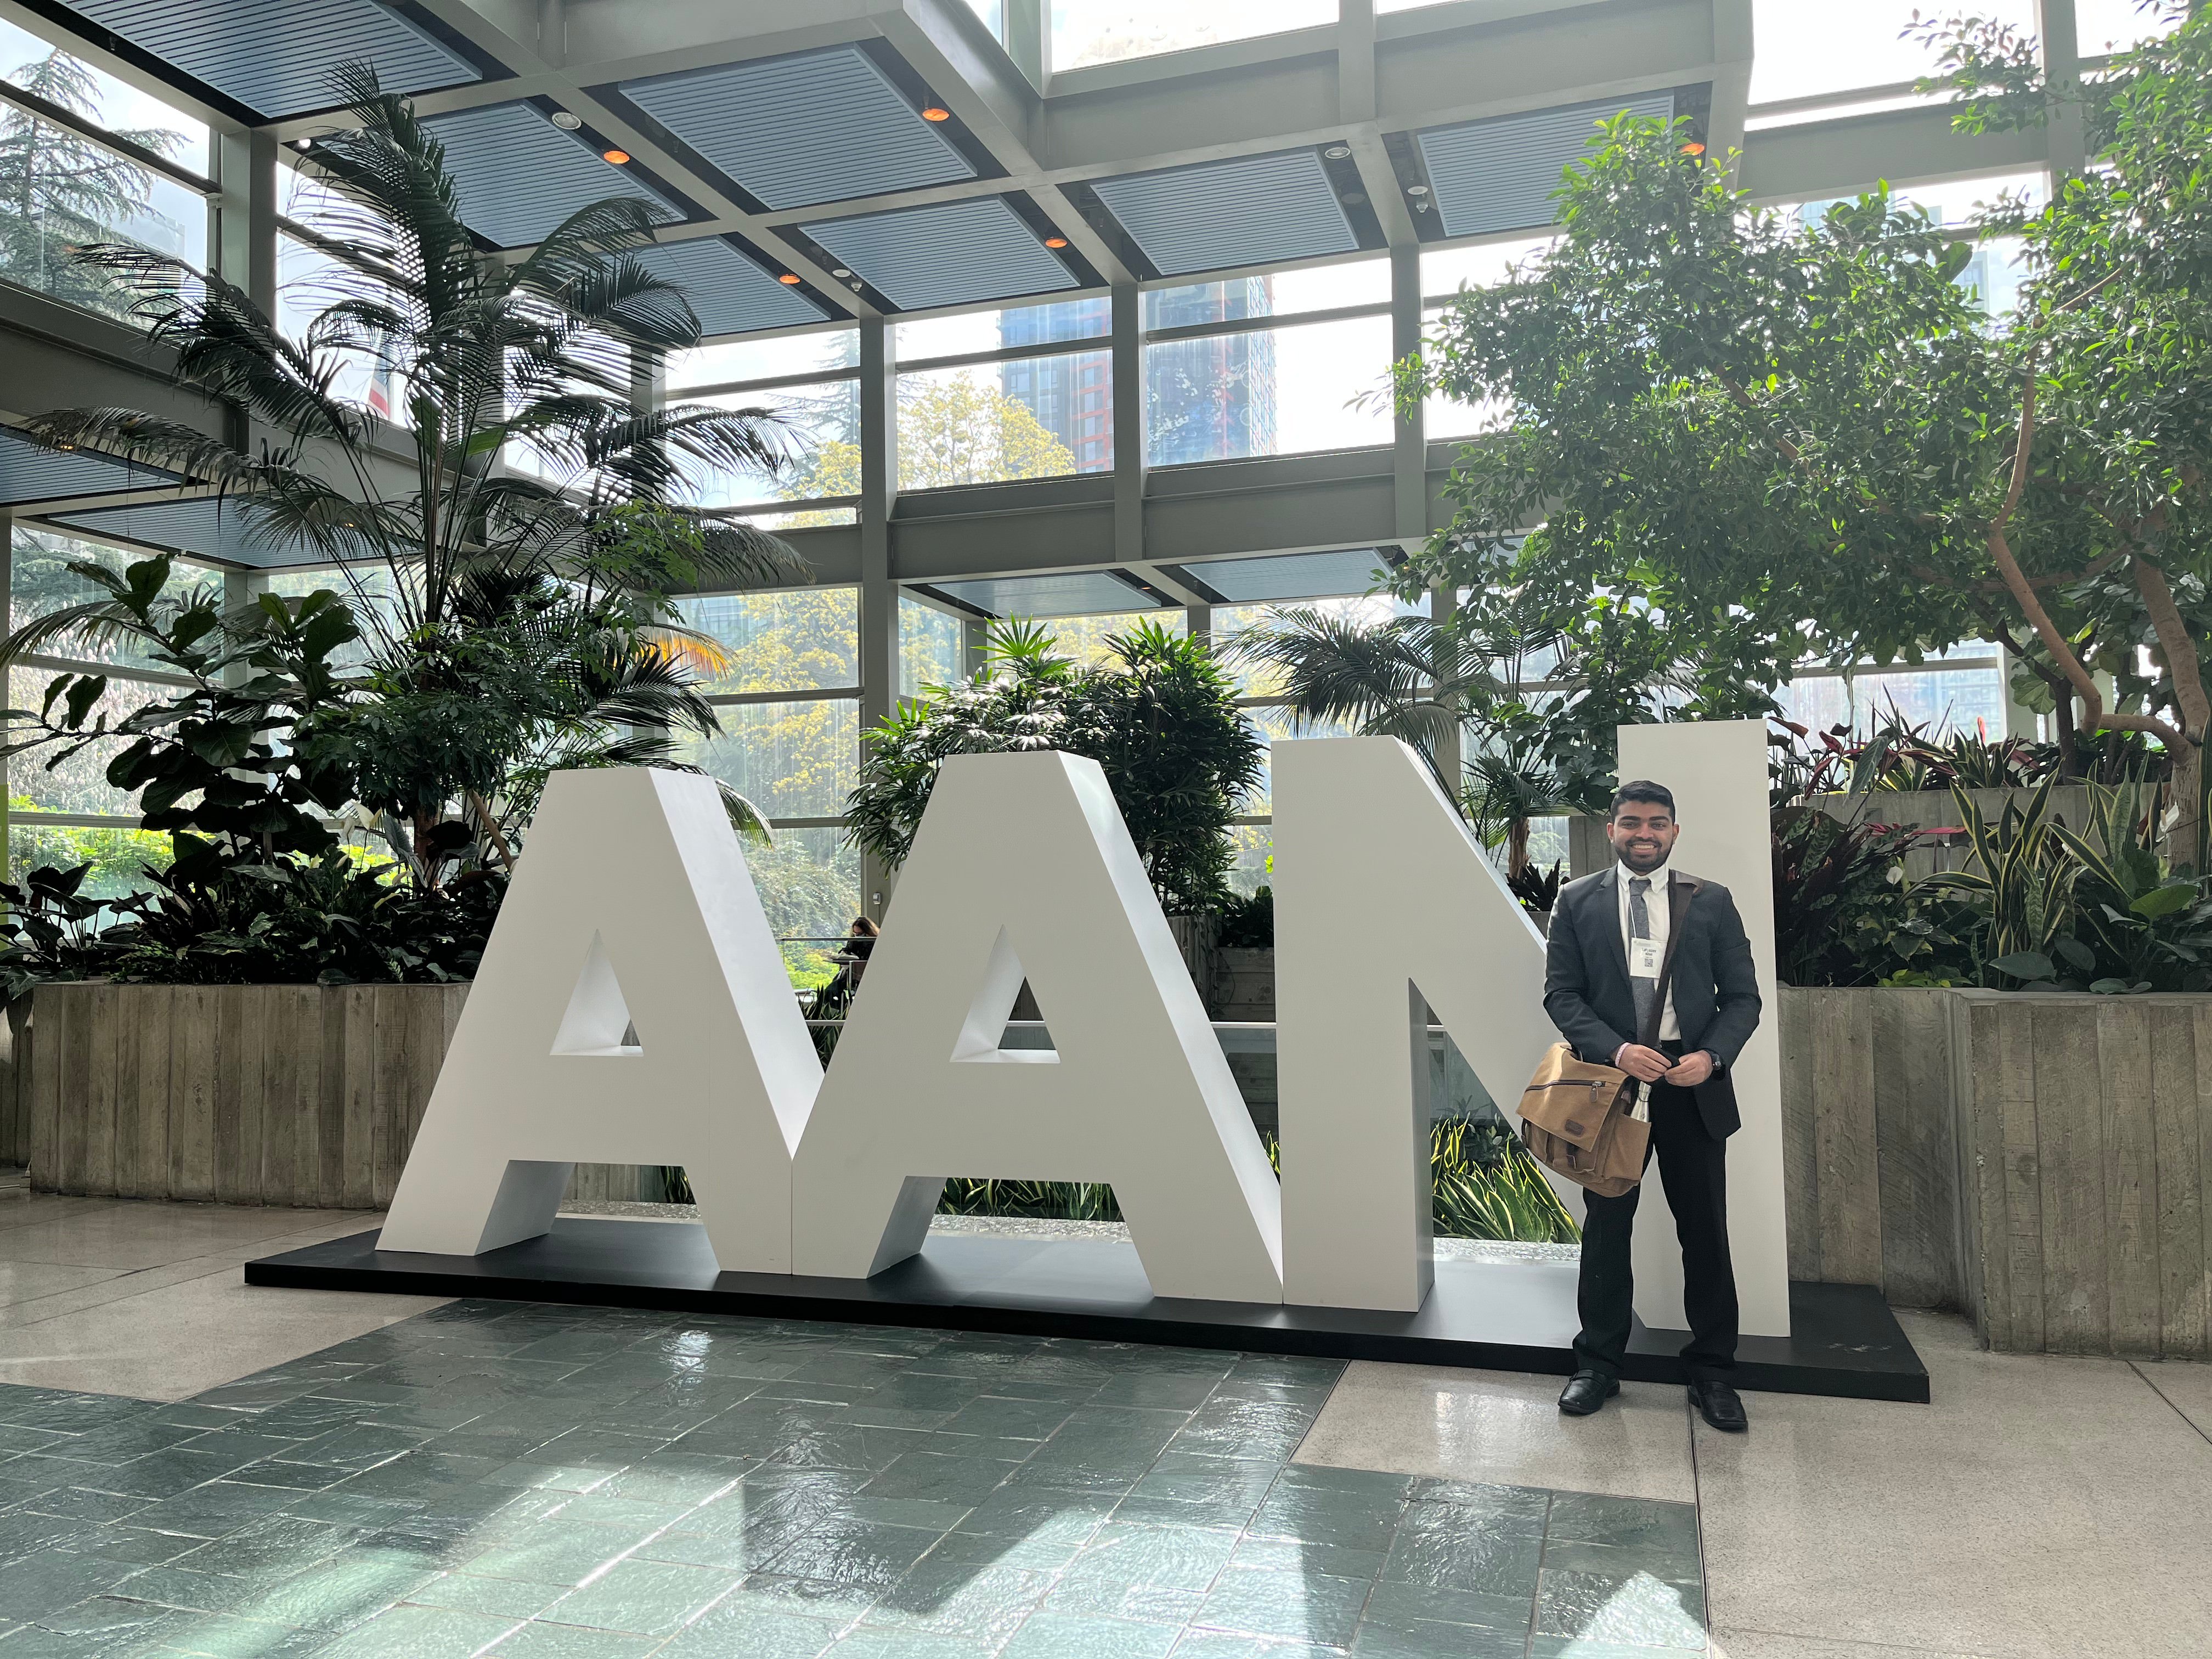 At the American Association of Neurology 2022 conference